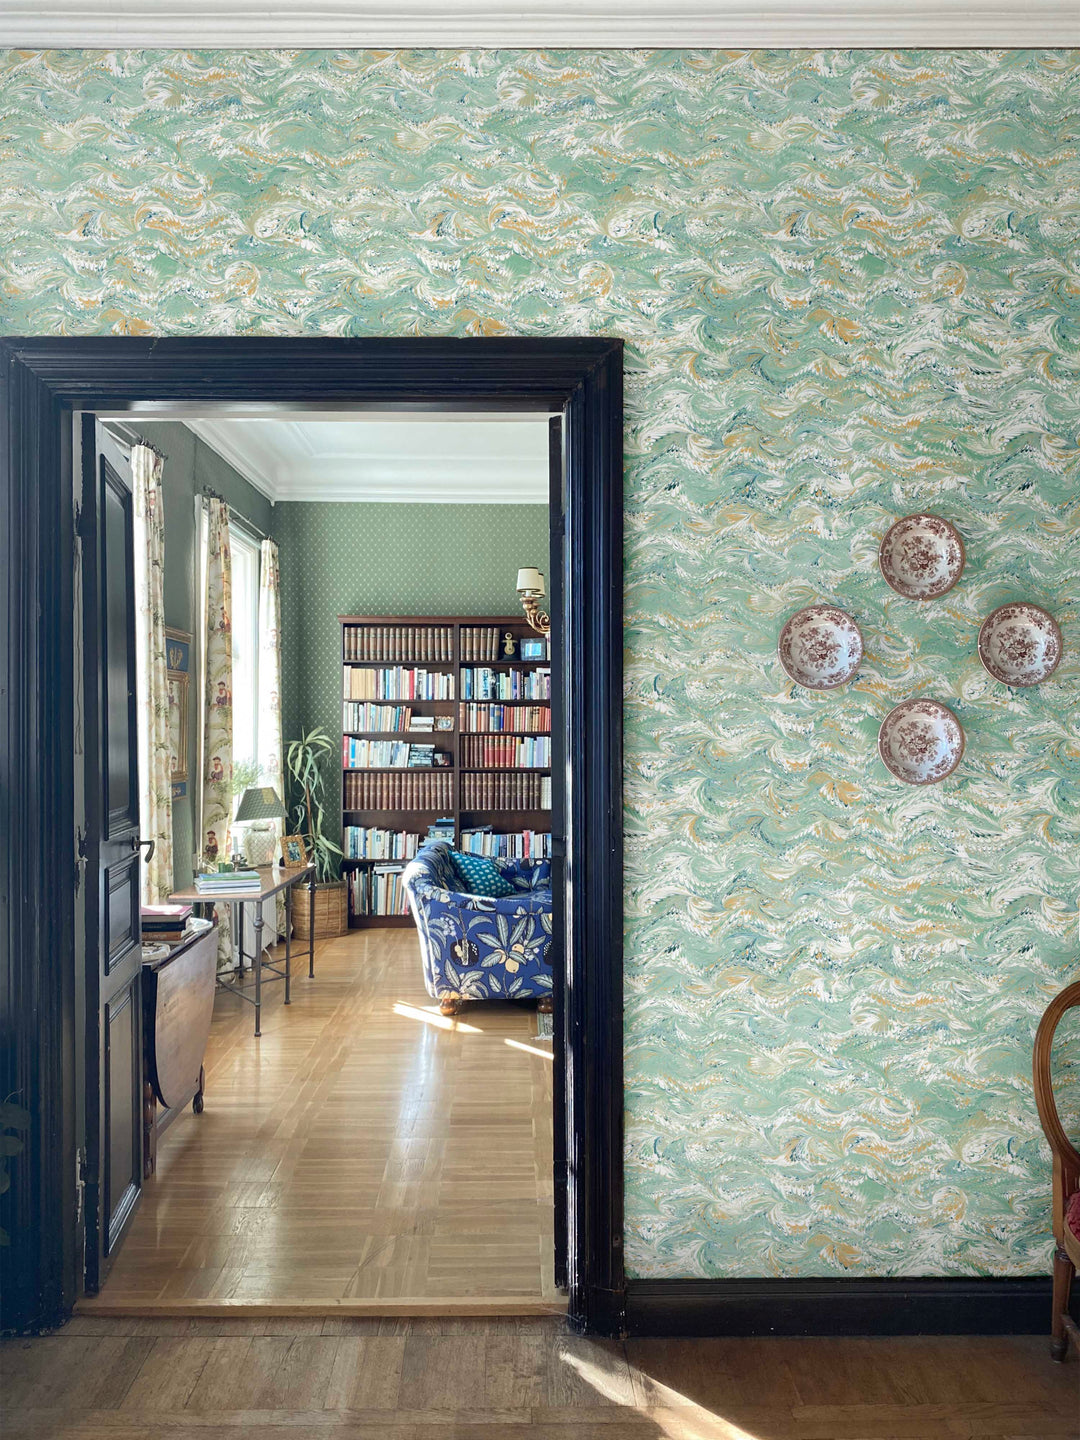 pale green marbled wallpaper on interior walls